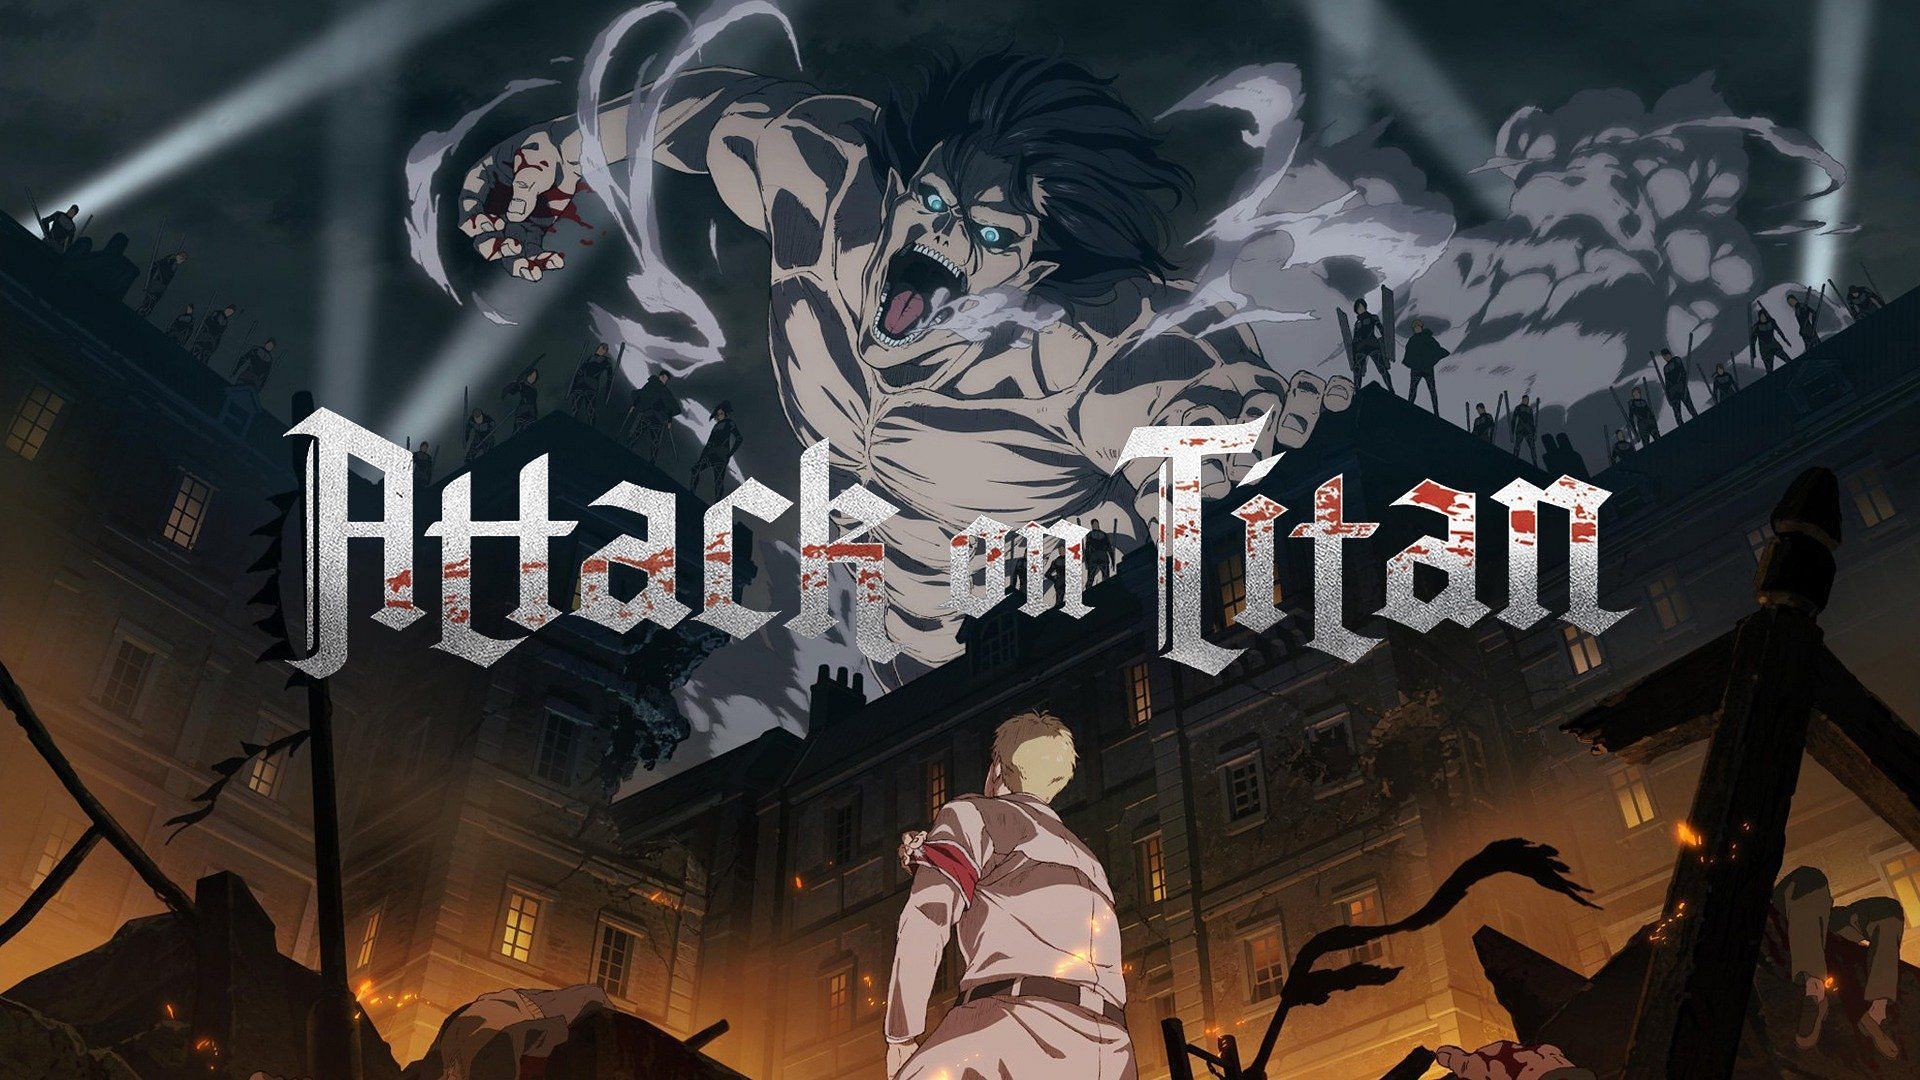 Part of the key visual for the series